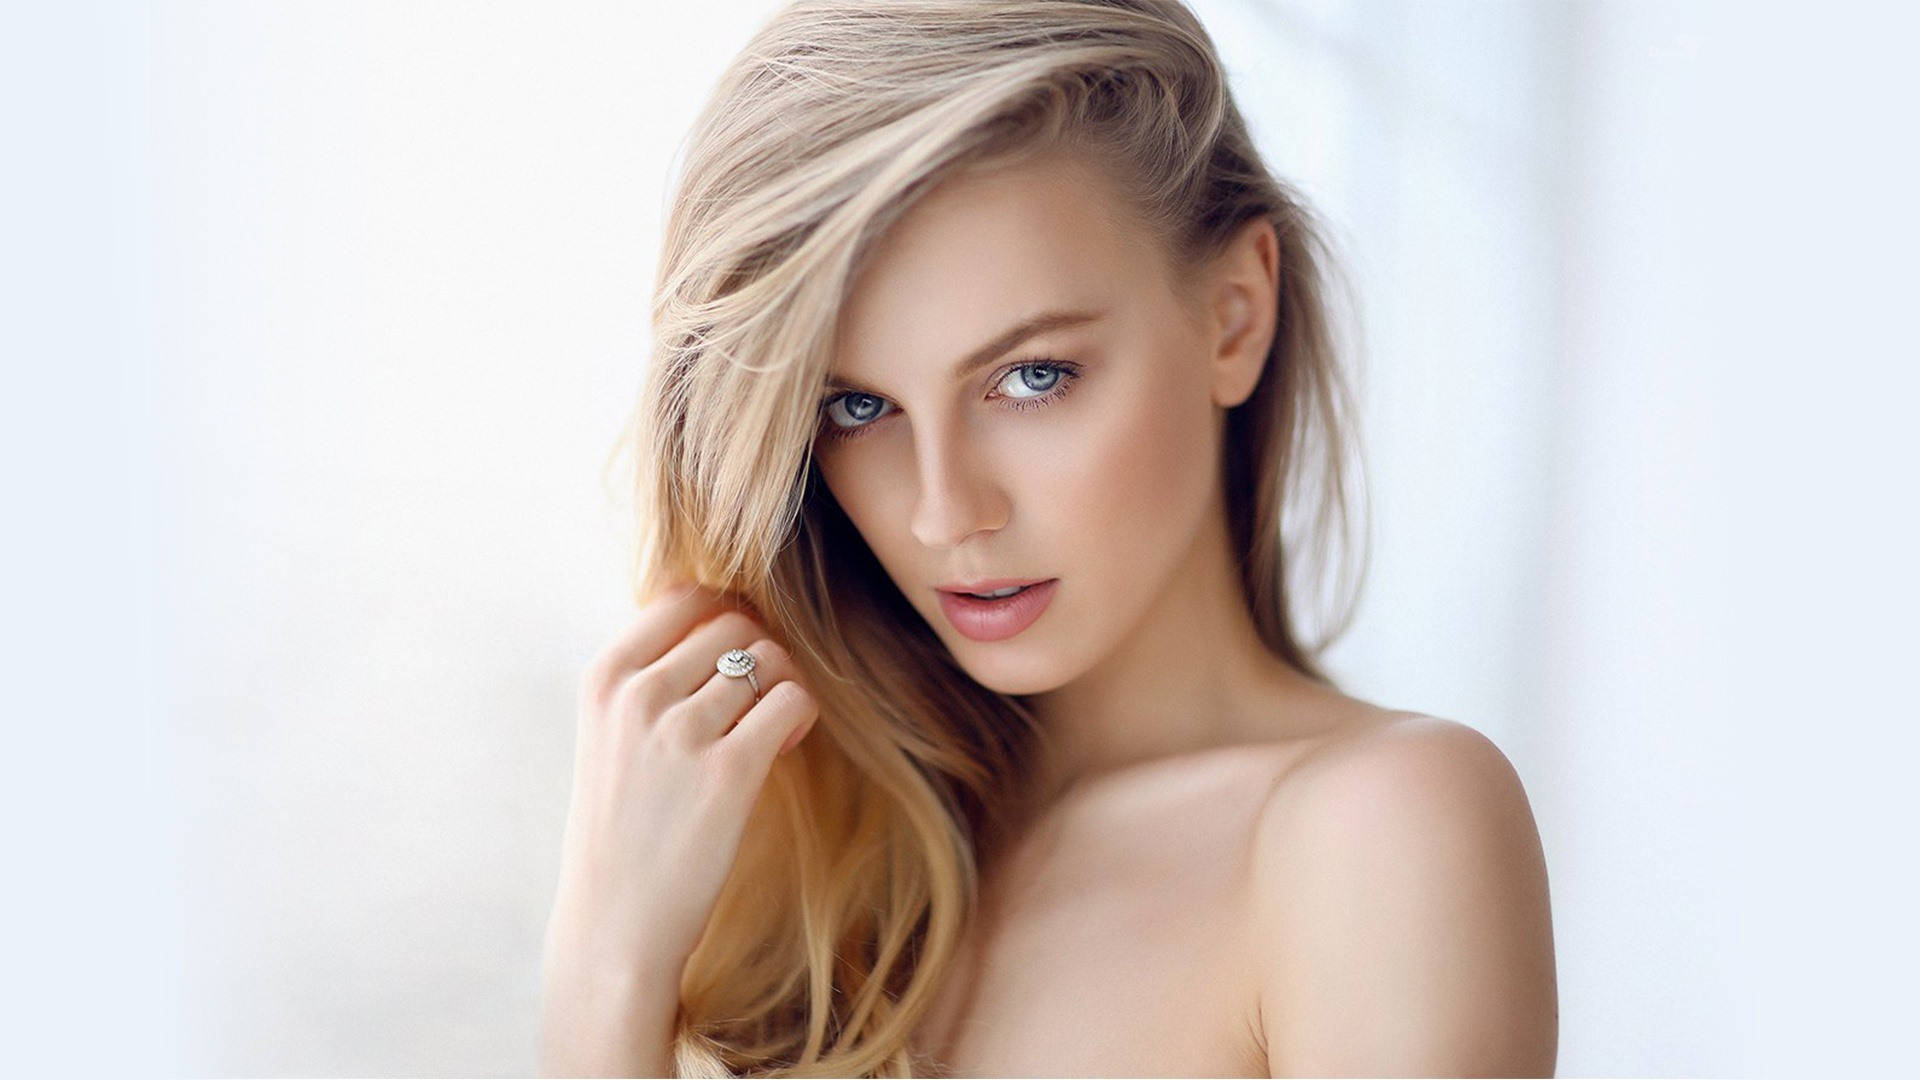 Radiant blonde woman with captivating eyes Wallpaper